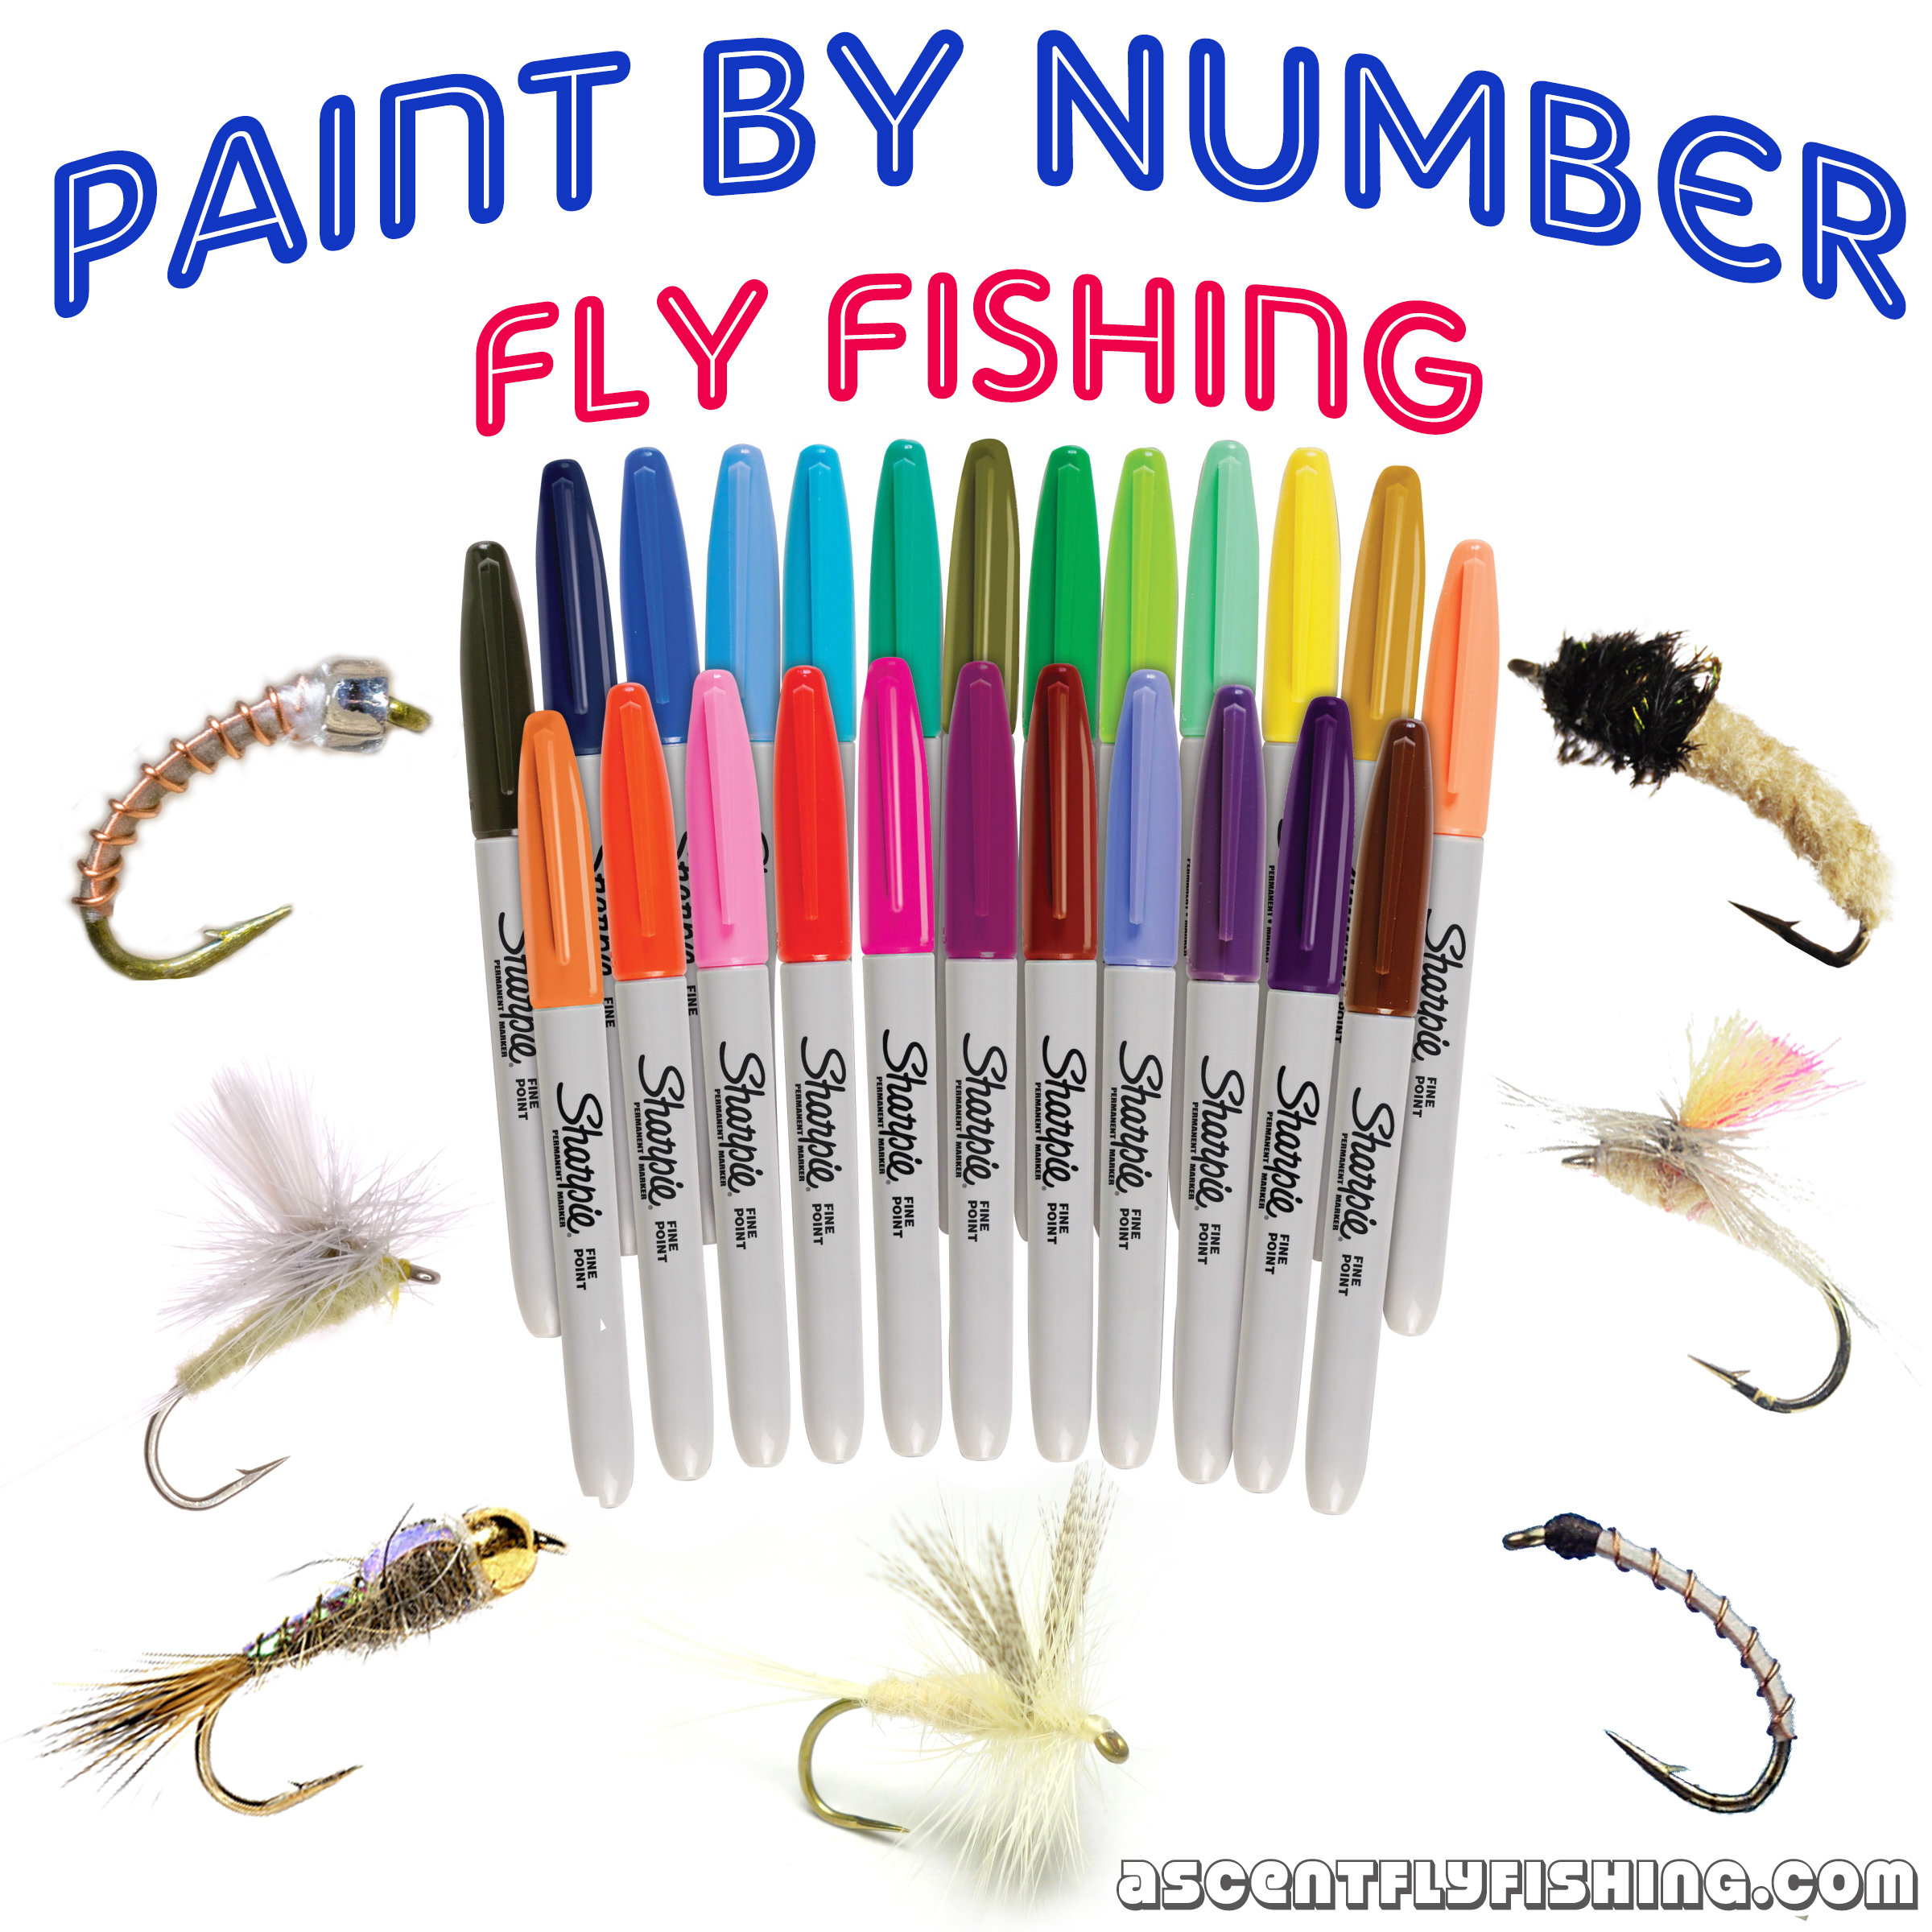 https://ascentflyfishing.com/product_images/uploaded_images/paint-by-number.jpg